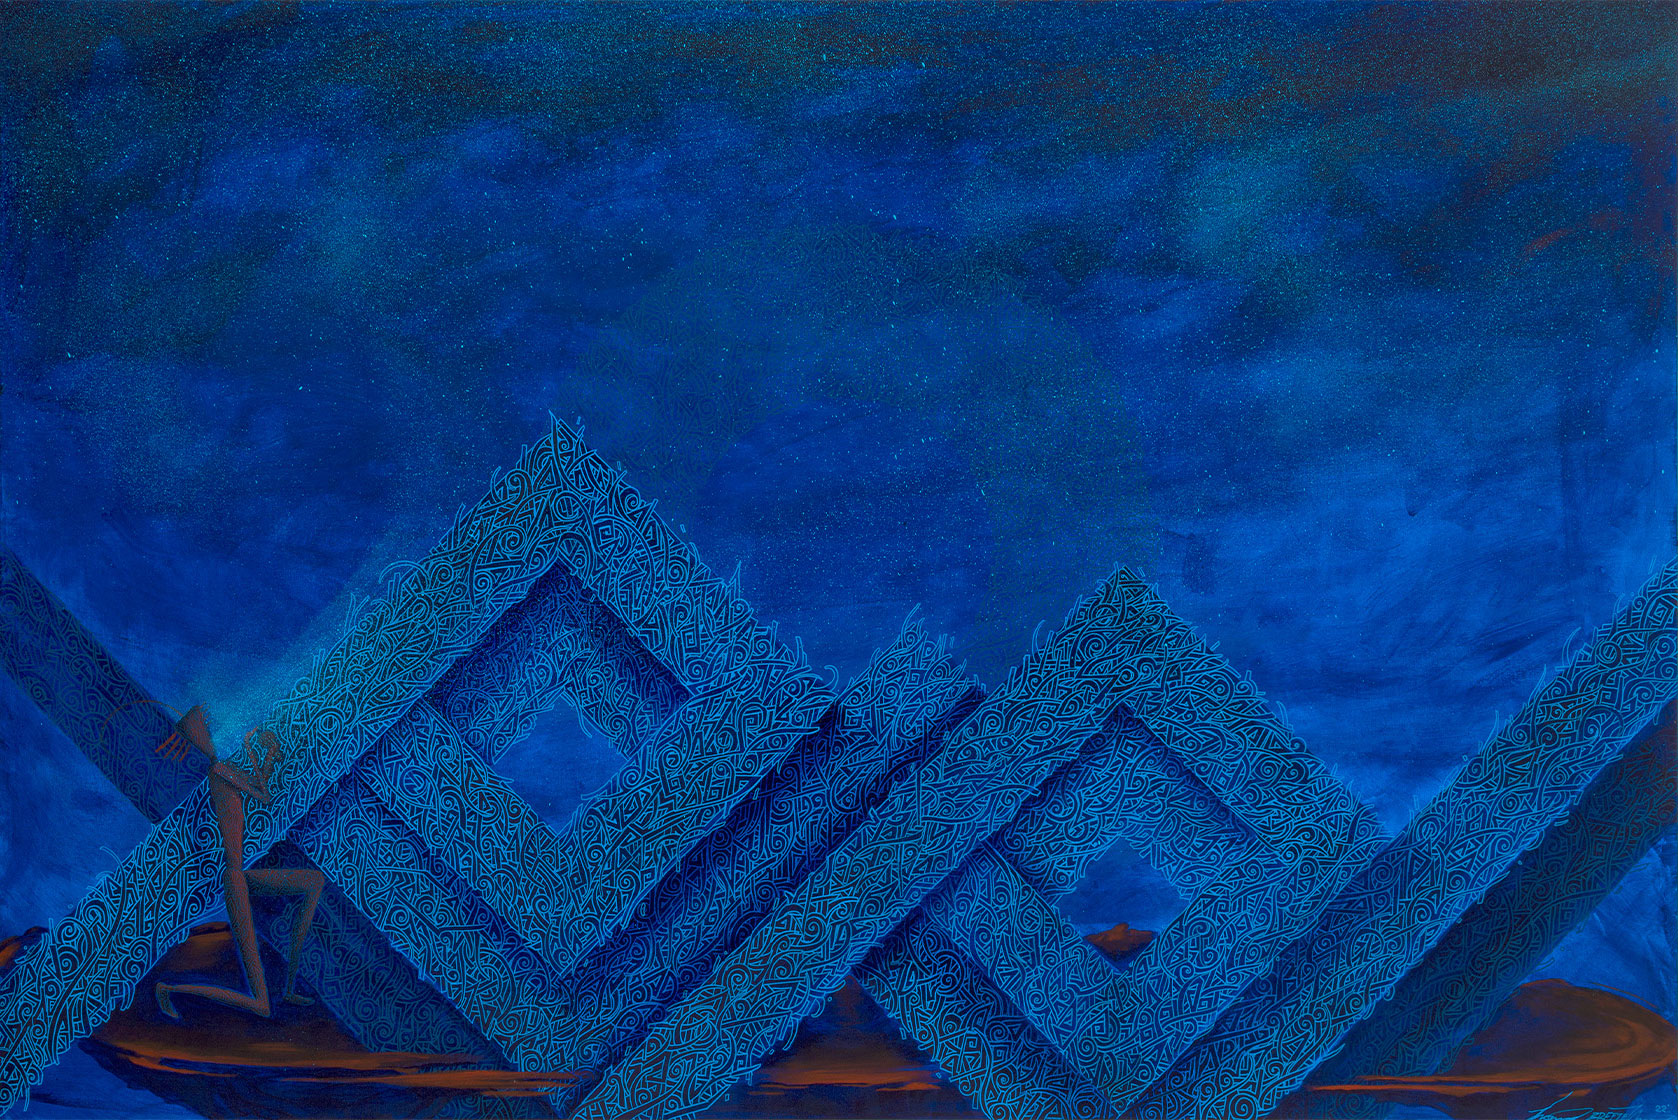 A painting of blue geometric shapes on a blue background.